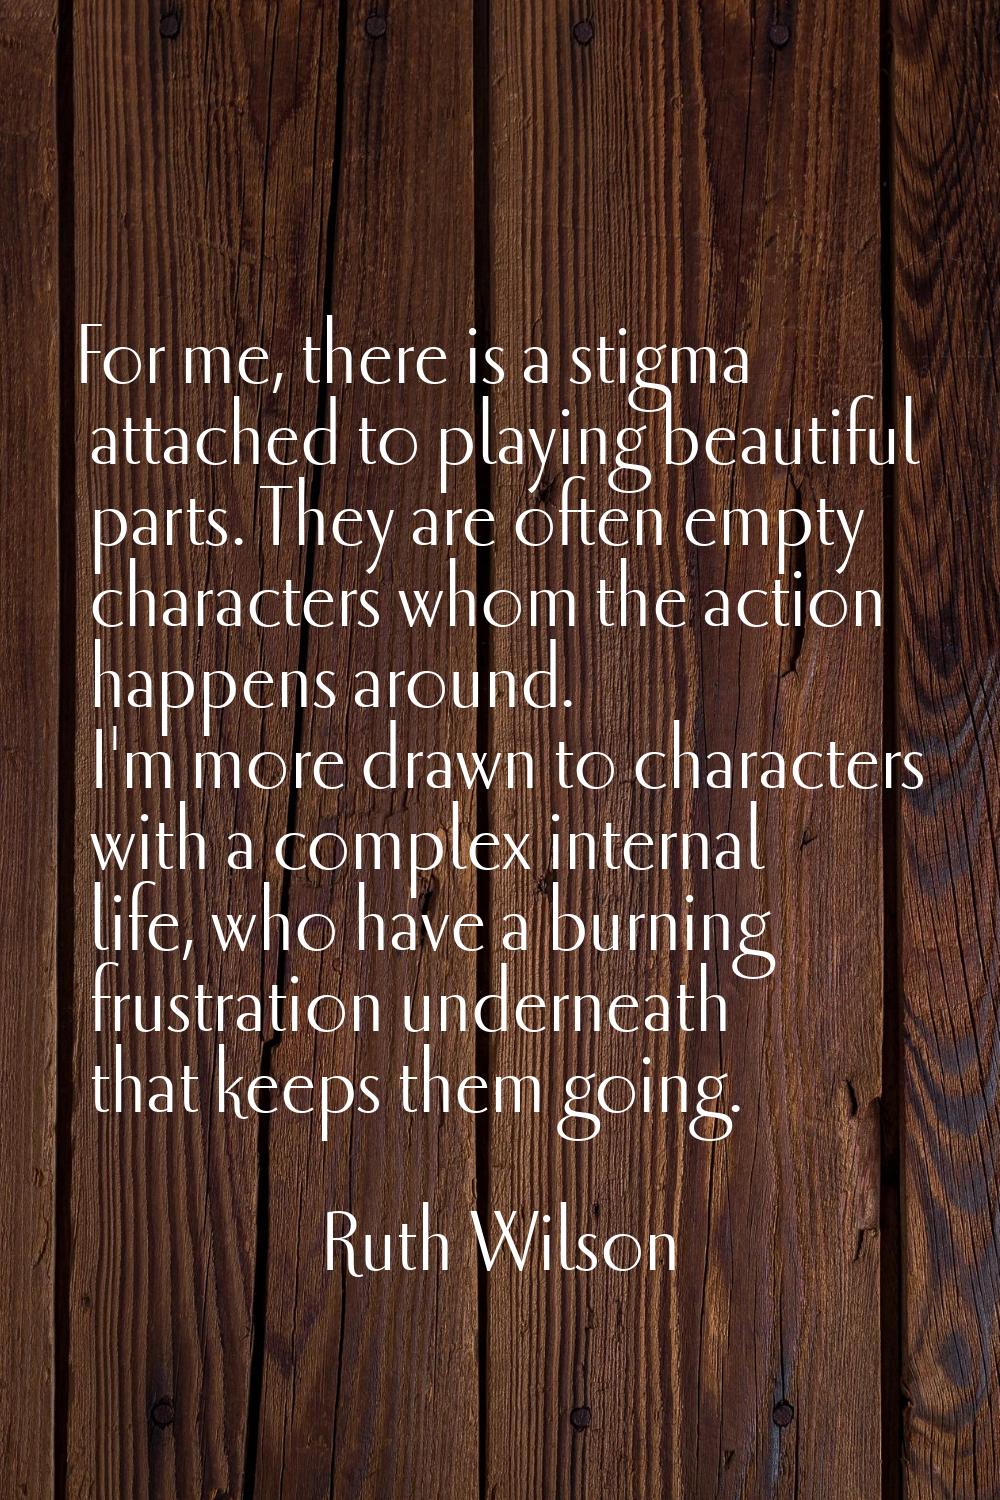 For me, there is a stigma attached to playing beautiful parts. They are often empty characters whom